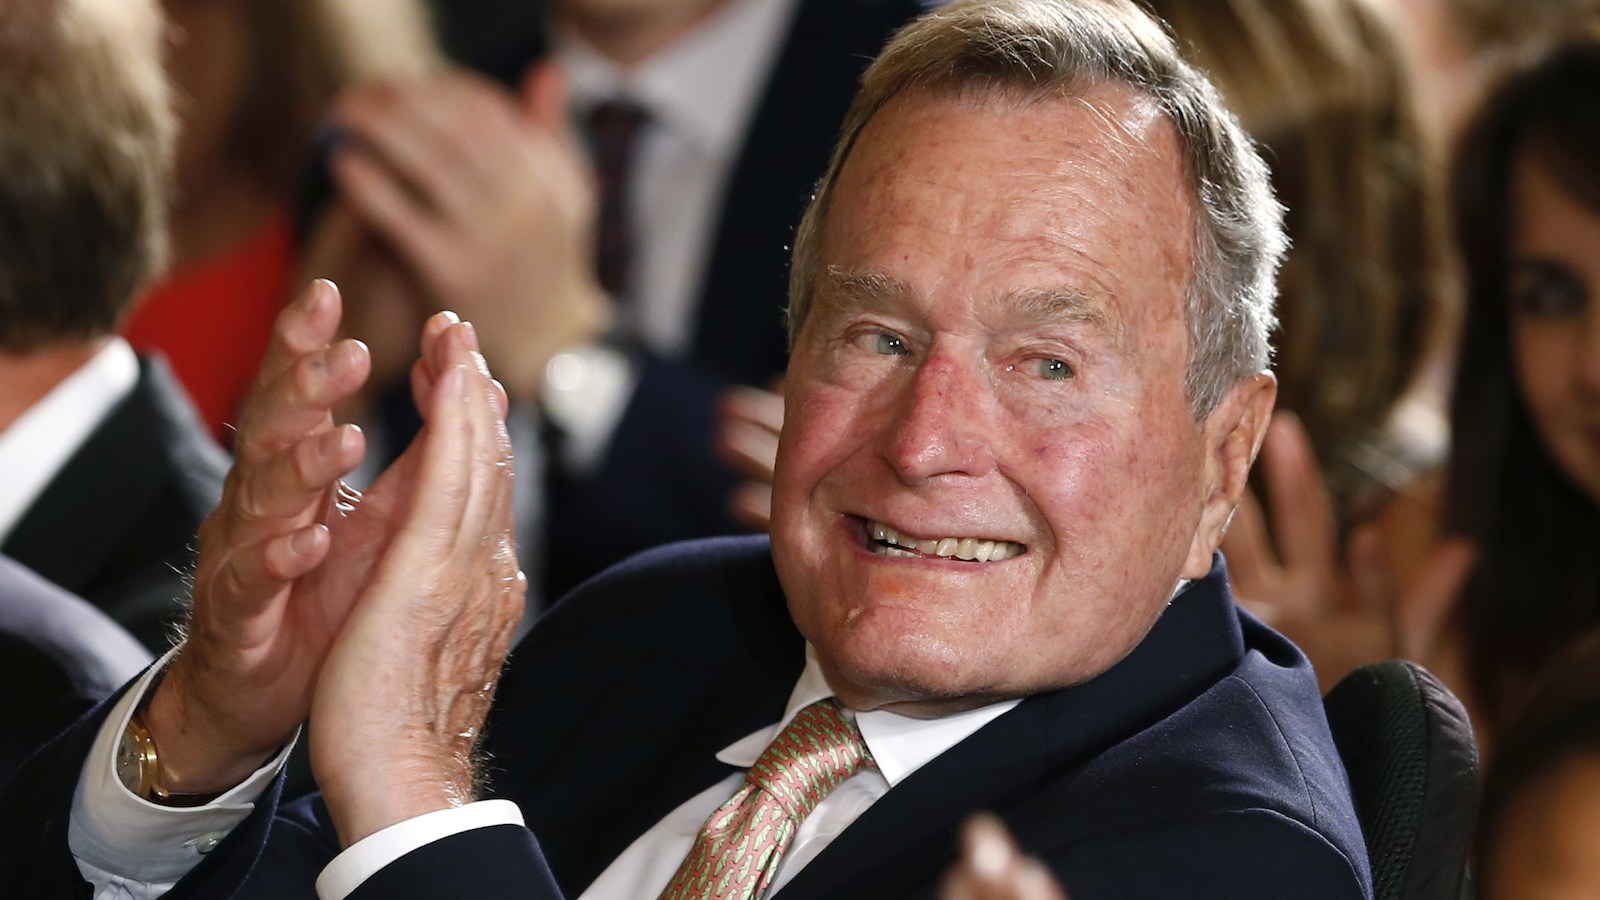 Former President George H. W. Bush applauds during an event at the White House